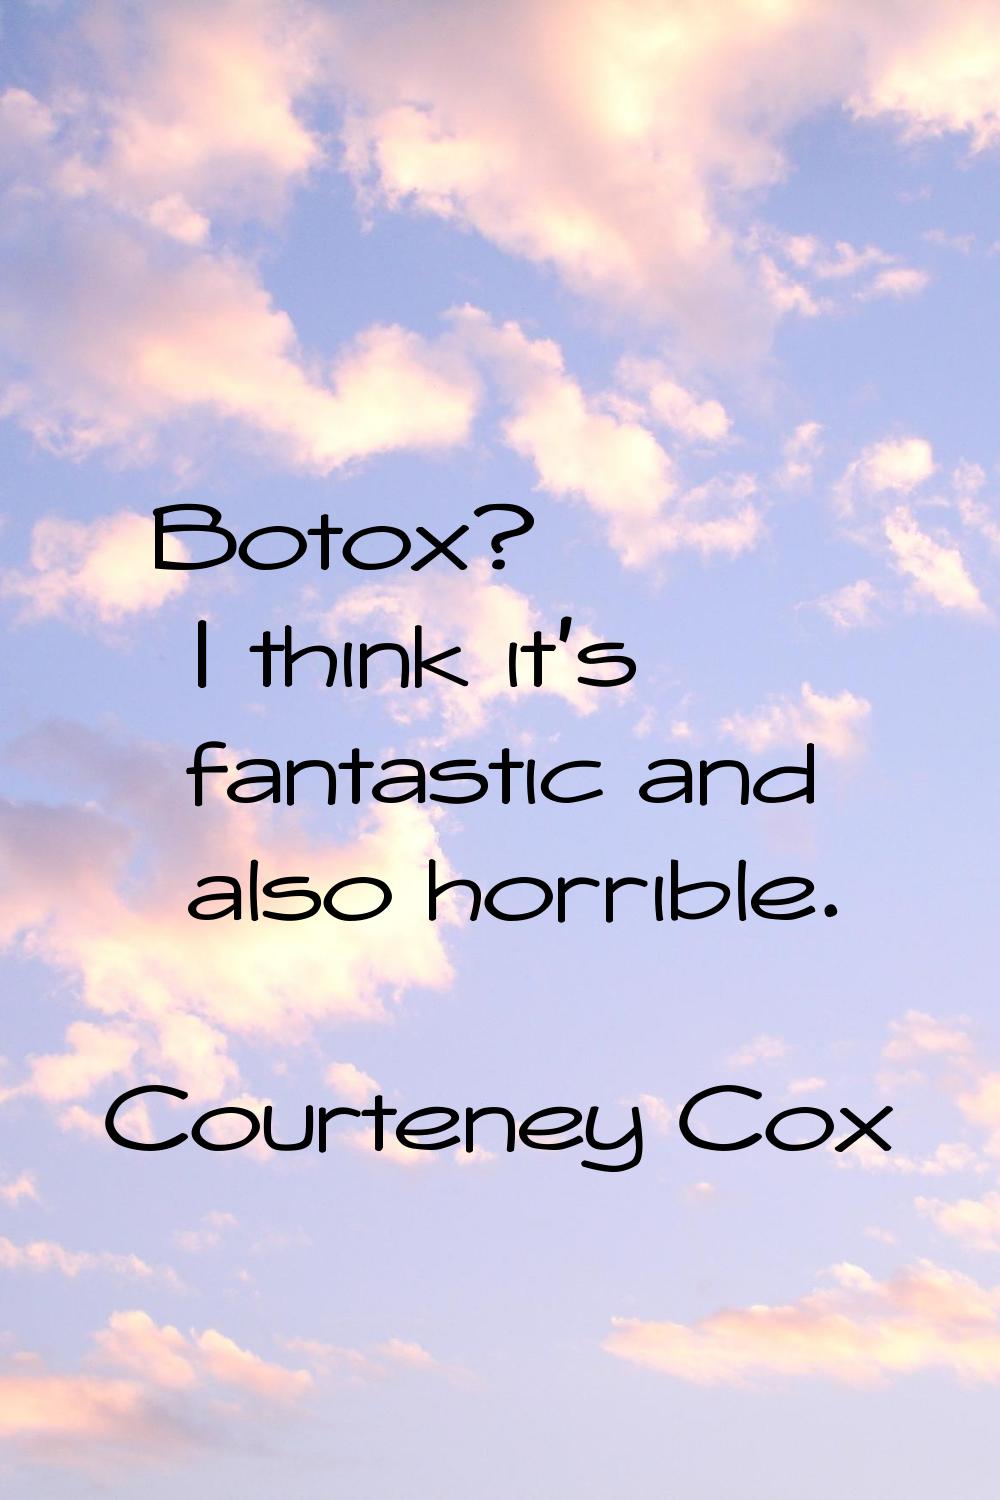 Botox? I think it's fantastic and also horrible.